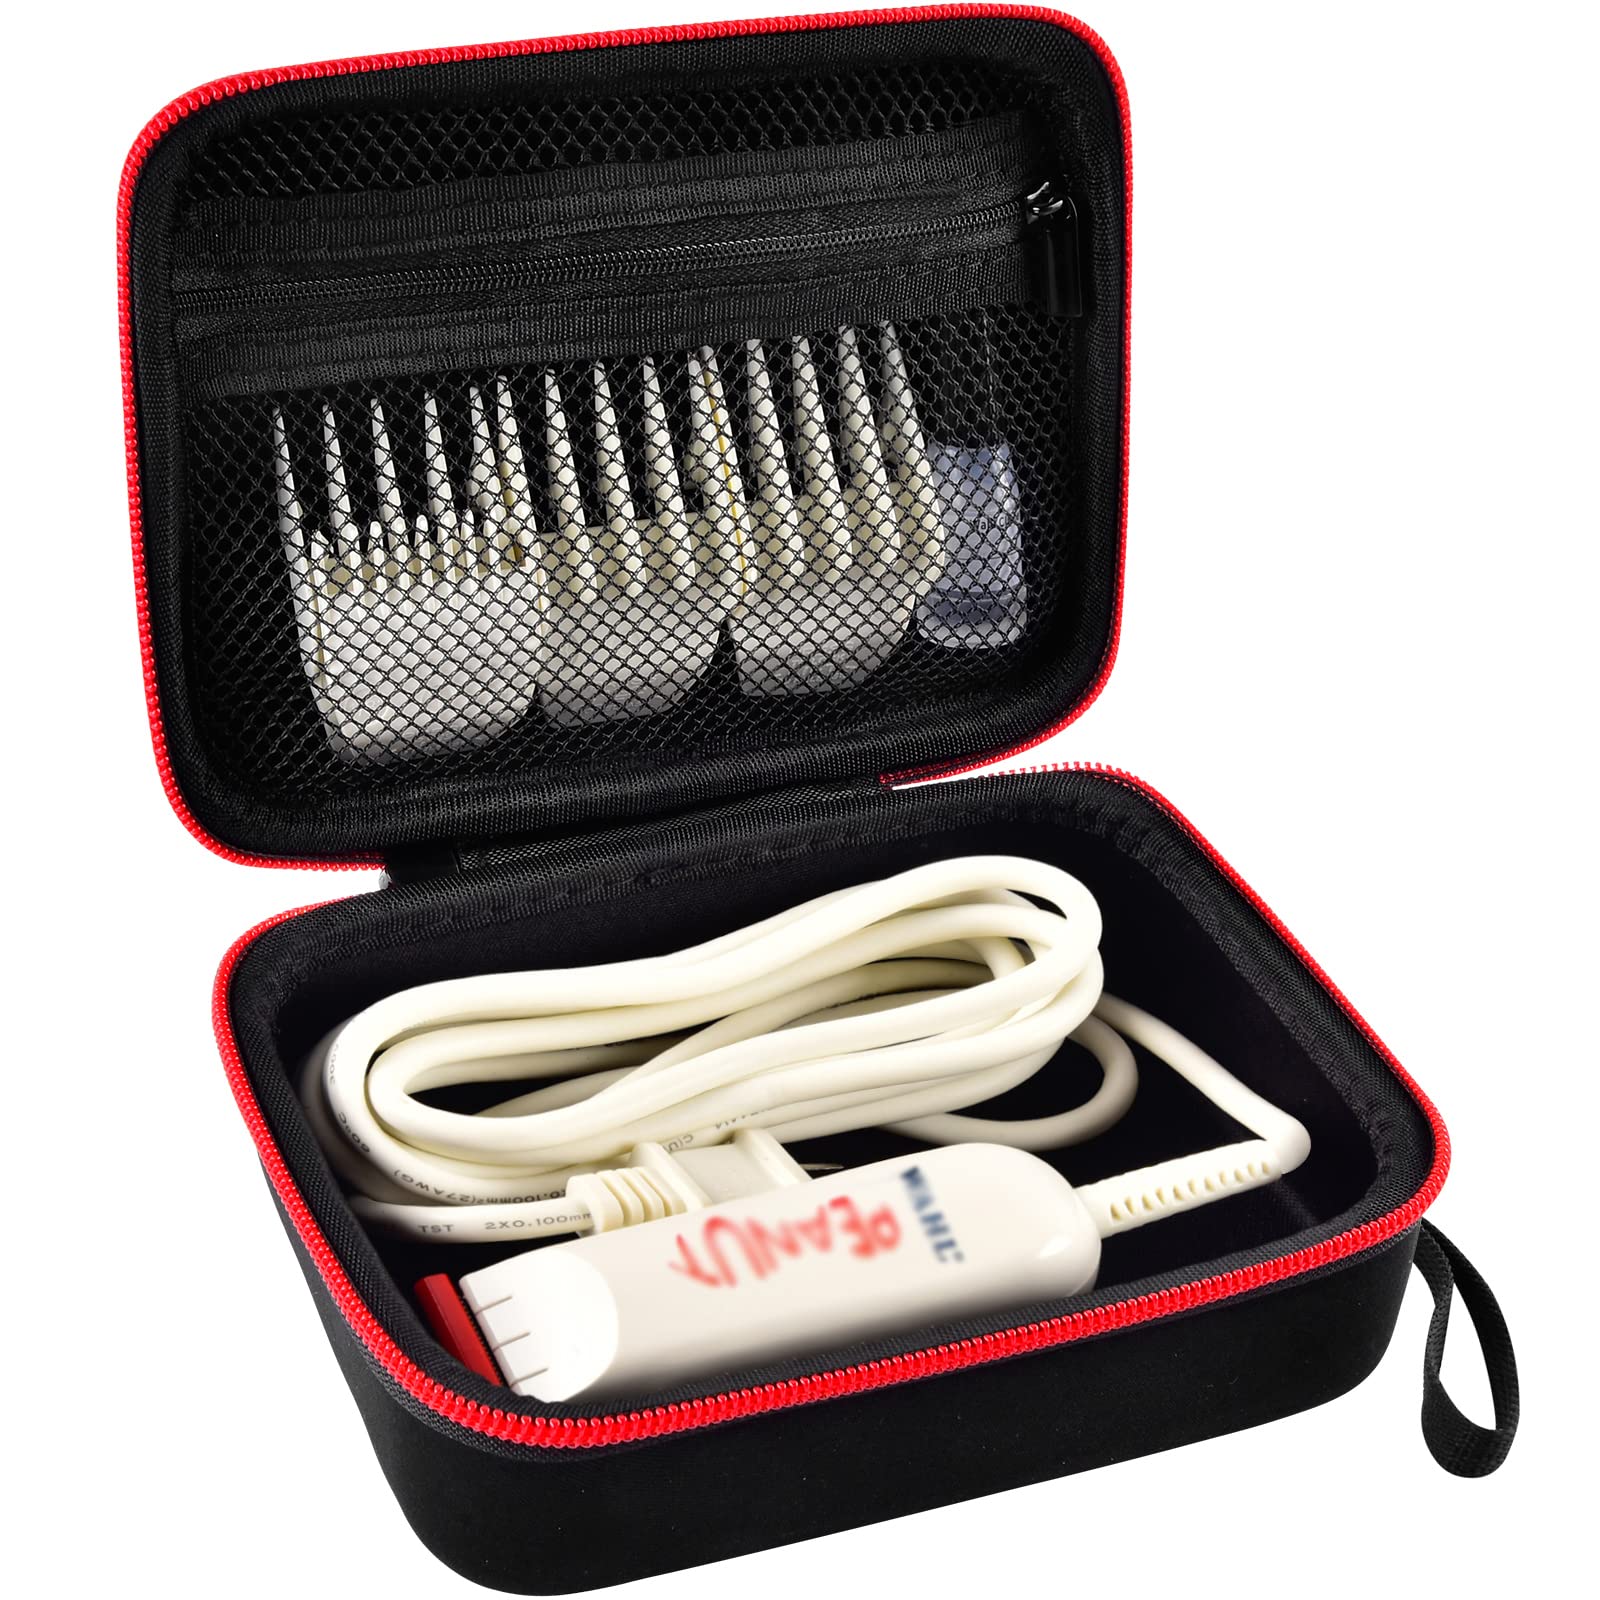 Case Compatible with Wahl Professional Peanut Classic Clipper Trimmer #8685  8655 8655-200 8633 8081 8035. Hair Clipper Organizer Holder for Attachment  Comb, Oil, Cleaning Brush, Blade Guard (Box Only) Red Zipper